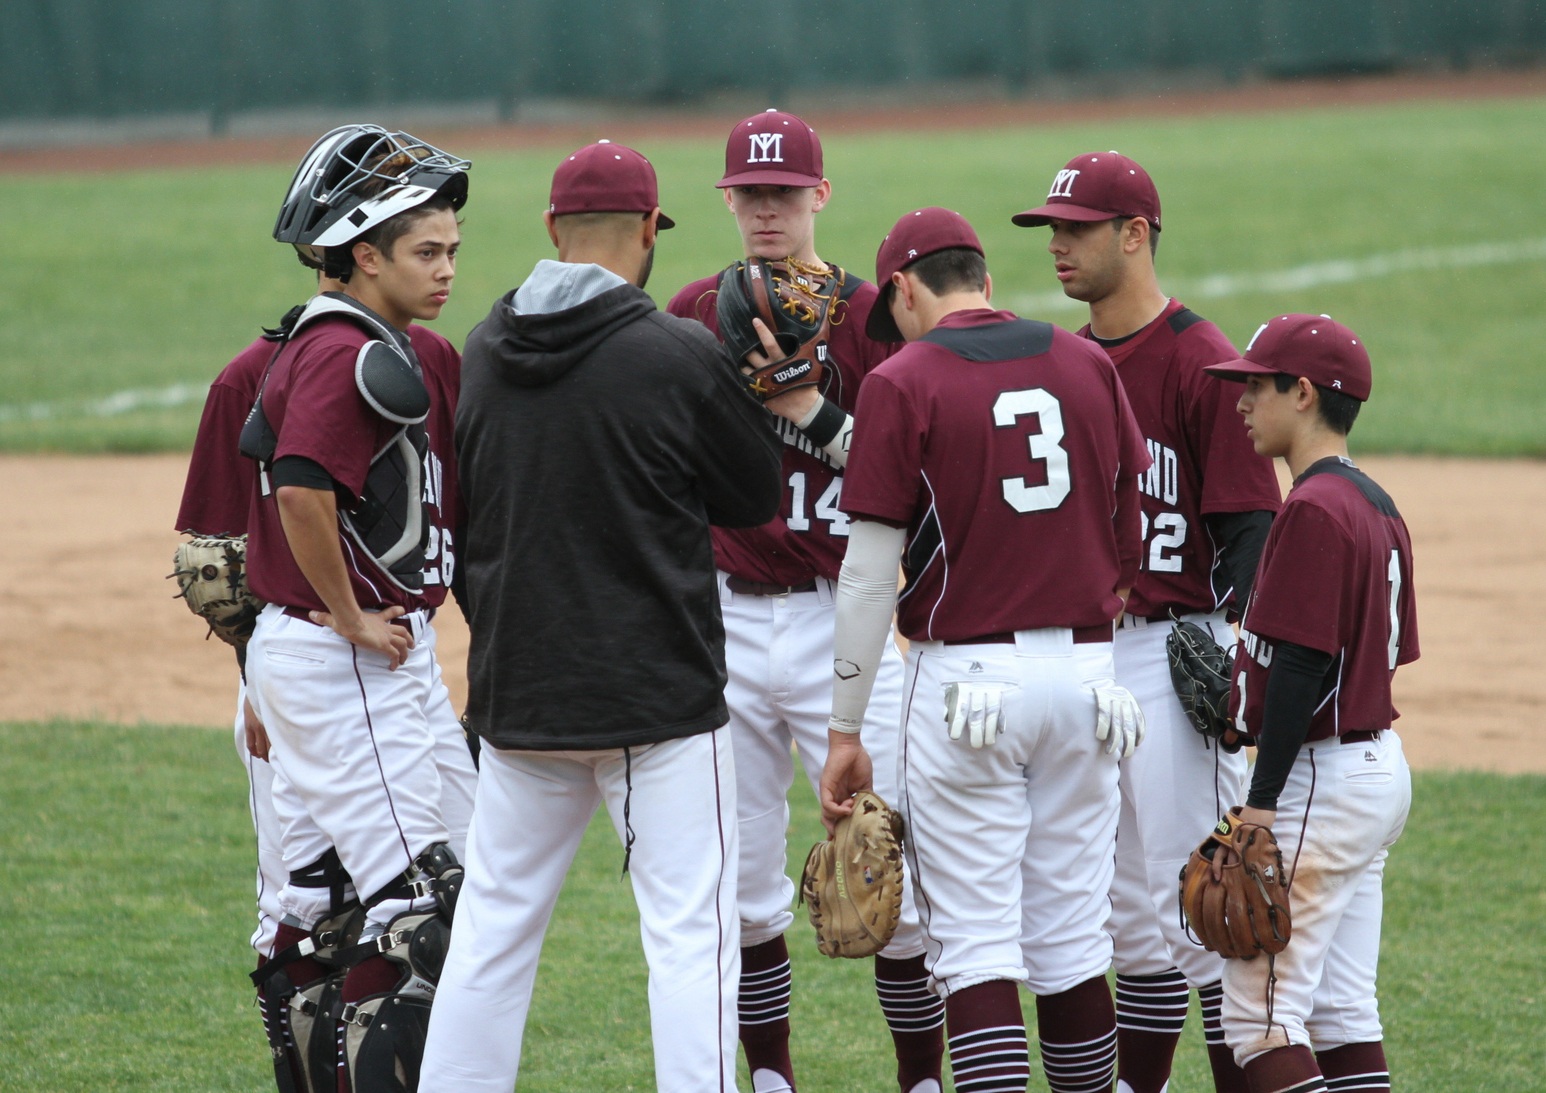 Members of the Mercer Island baseball team huddle with coach Dominic Woody during their regional matchup against Southridge Saturday in Kelso. The Suns beat the Islanders 11-1 (photo courtesy of Gregg Petrie).